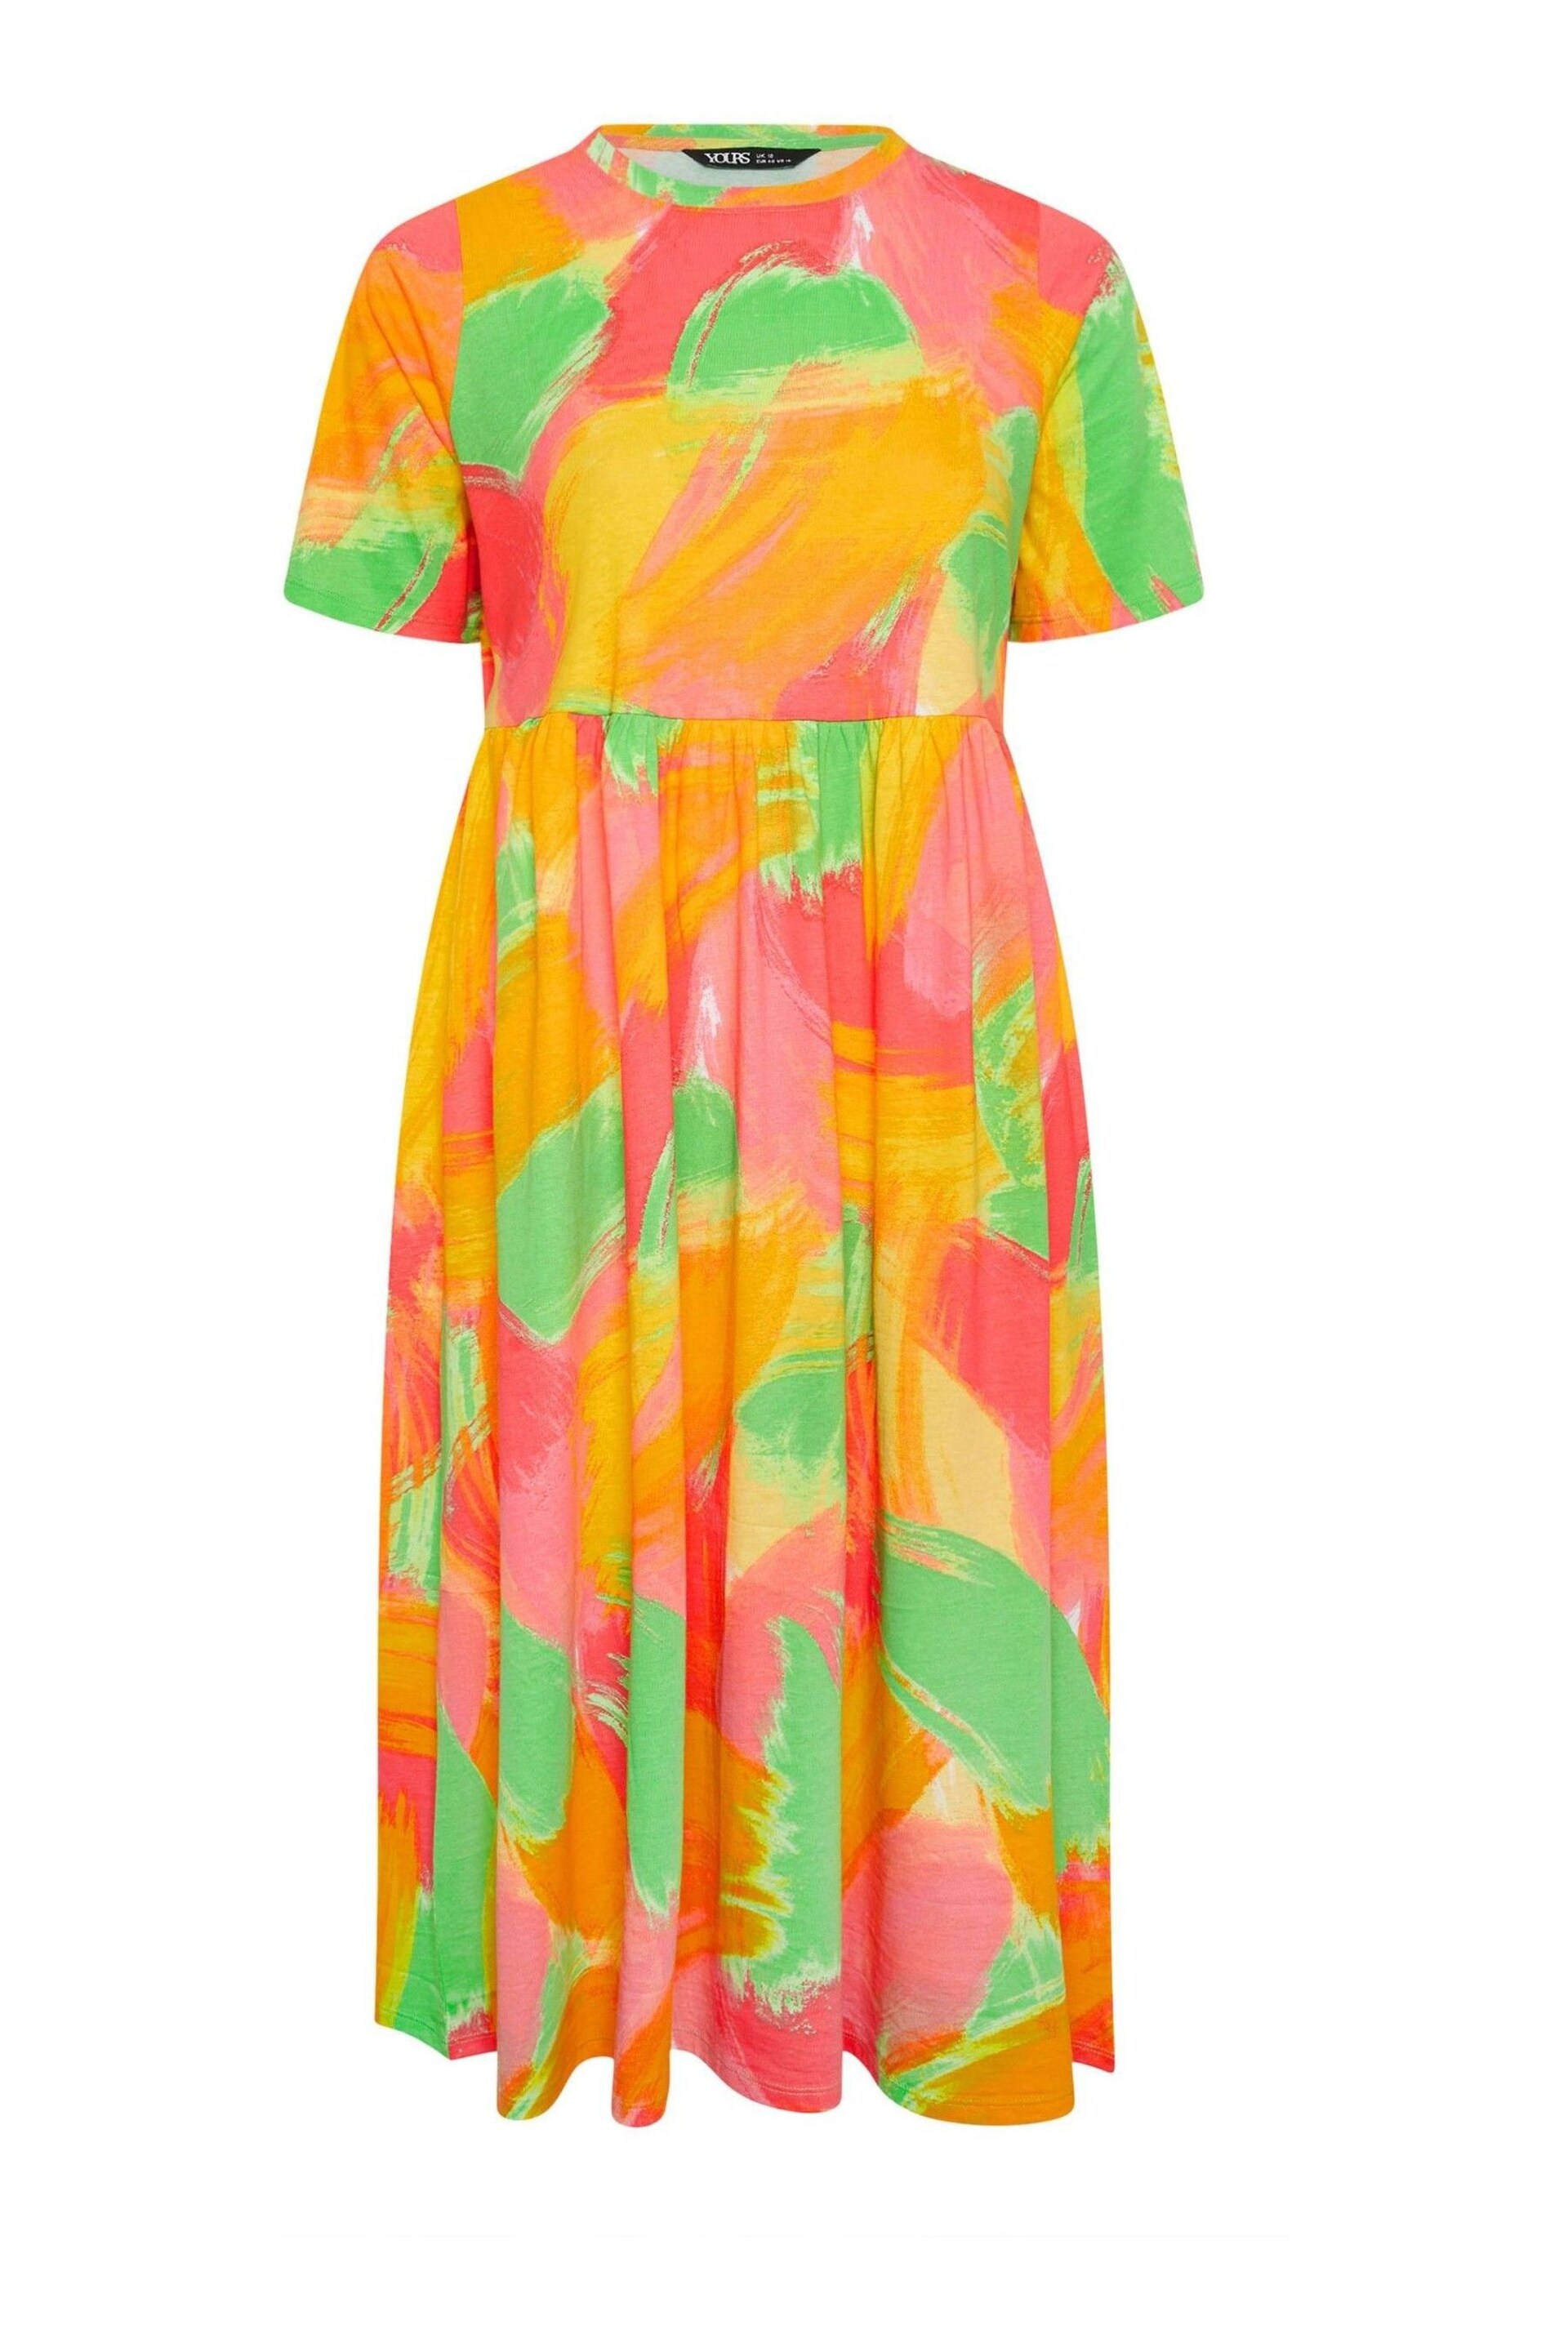 Yours Curve Orange Abstract Print Pure Cotton Midaxi Dress - Image 6 of 6